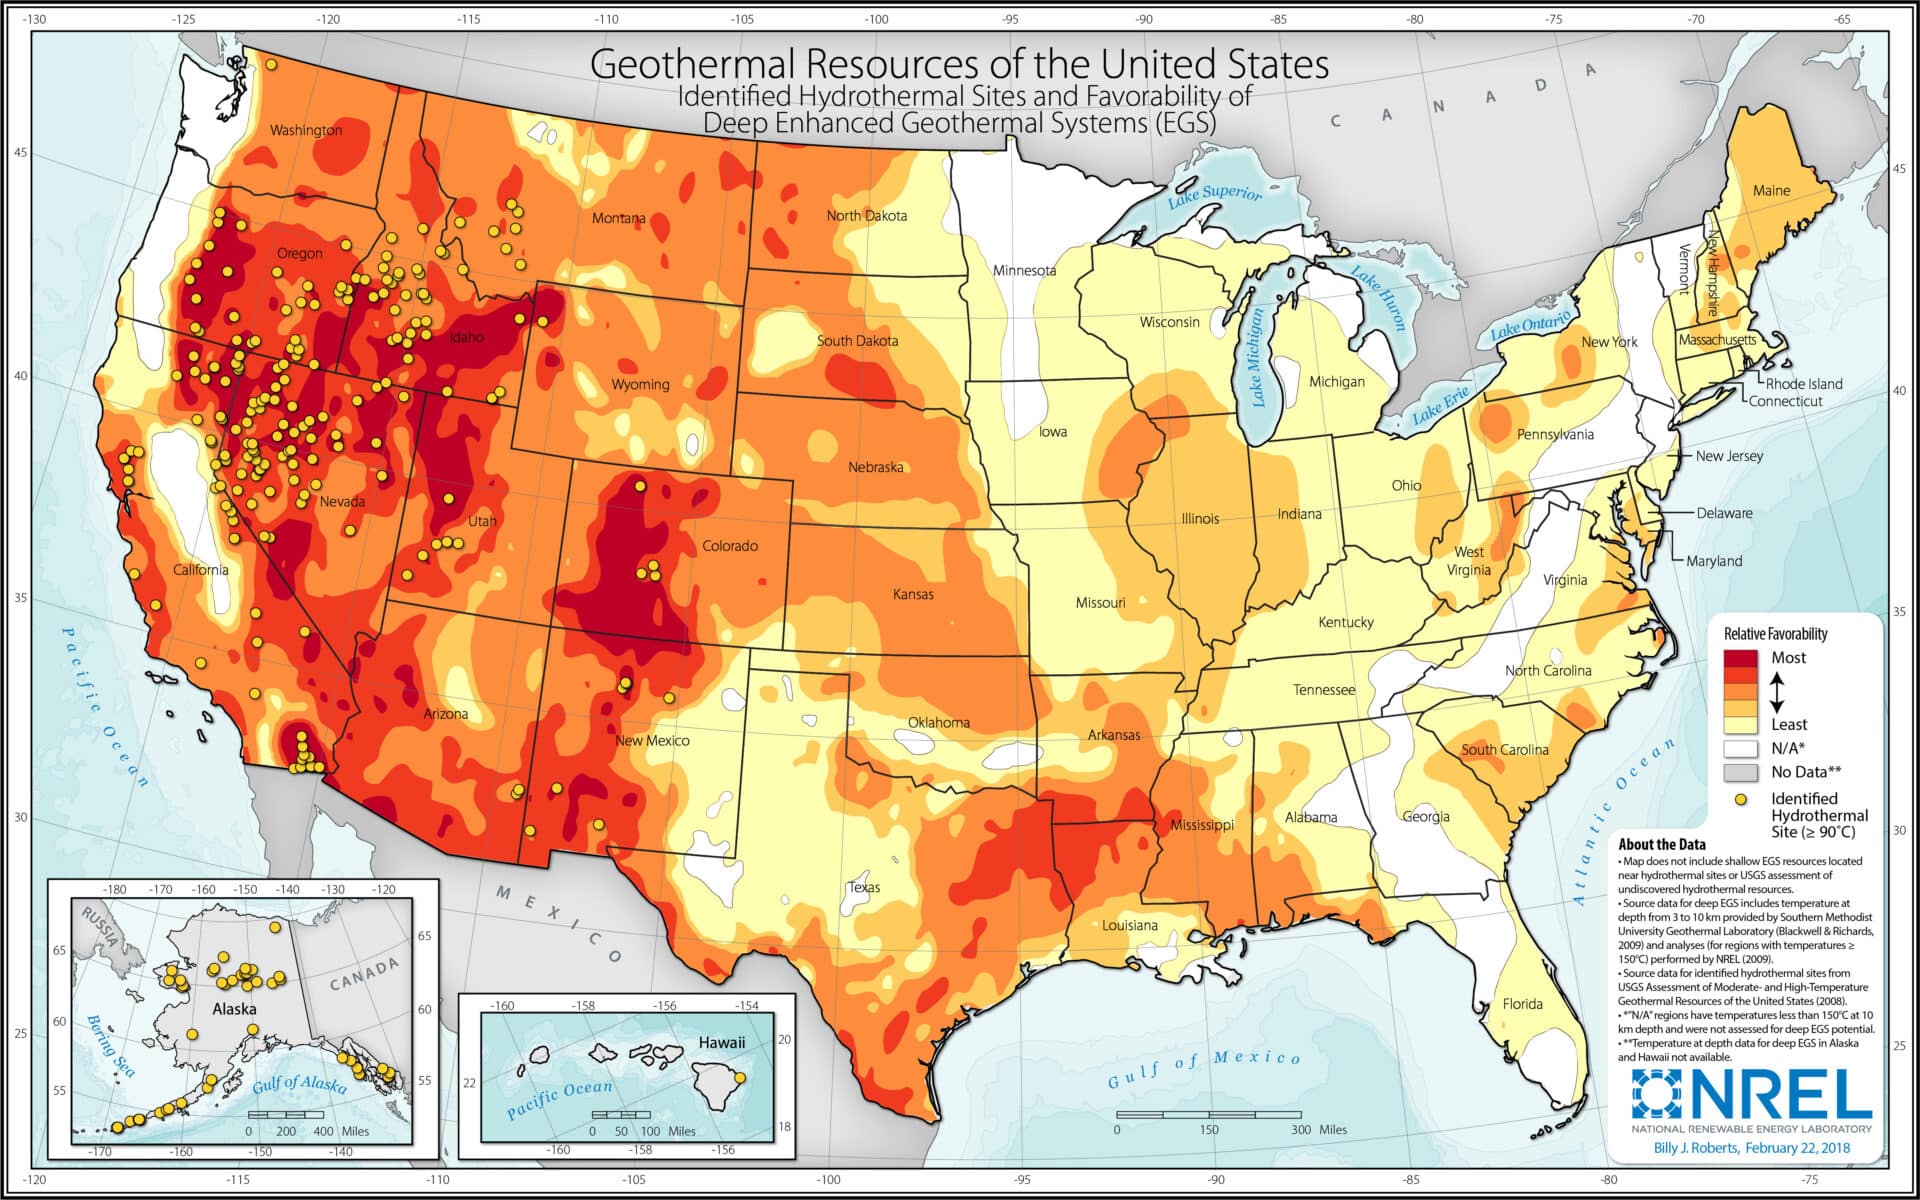 Energy Department estimates suggest enhanced geothermal systems could potentially heat the entire United States for at least 8,500 years. (National Renewable Energy Laboratory)